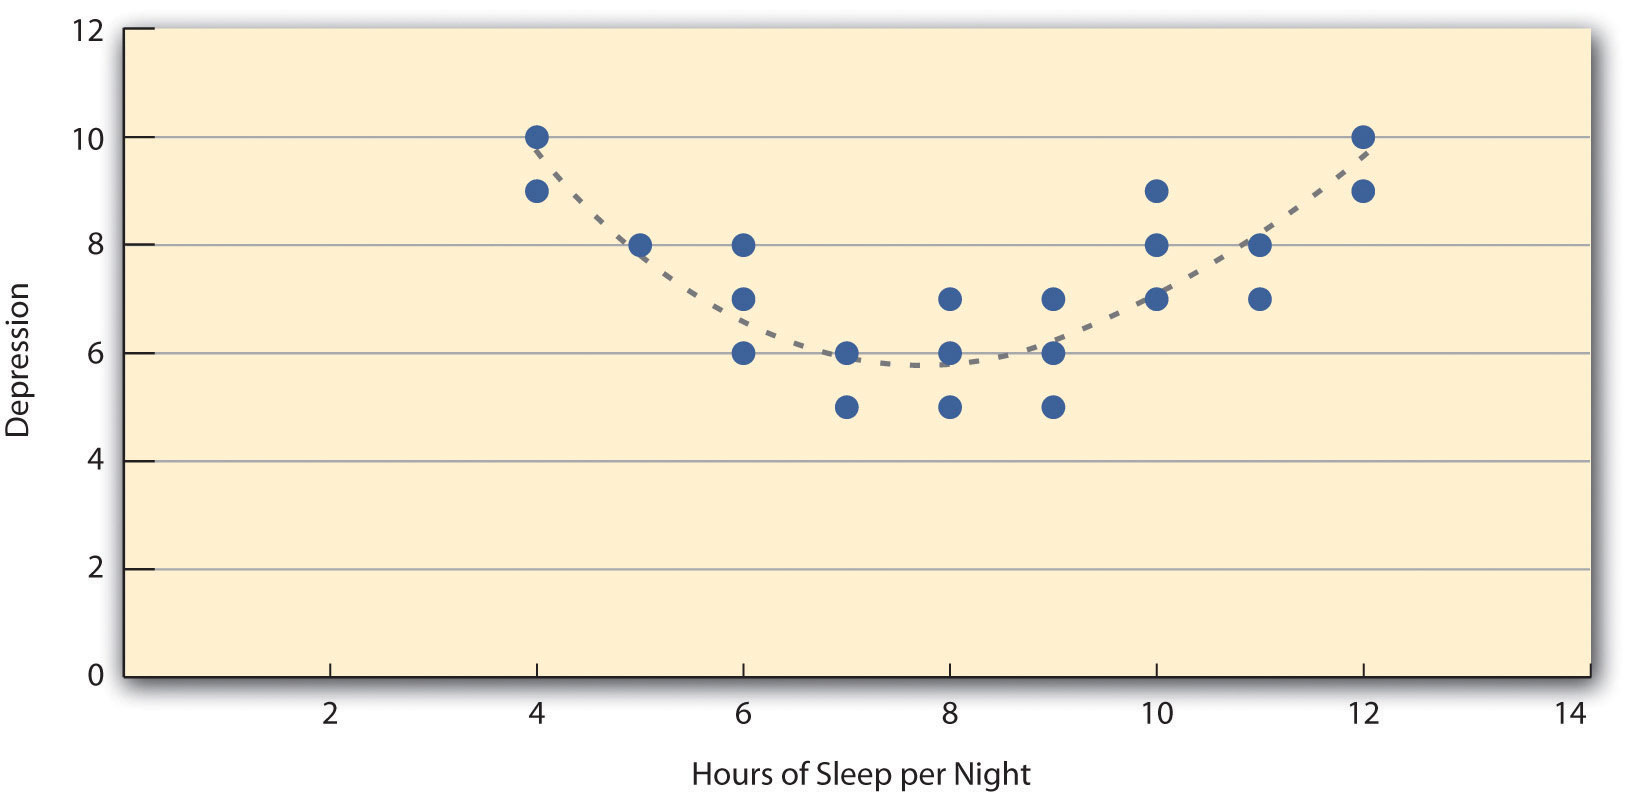 Hypothetical Nonlinear Relationship Between Sleep and Depression